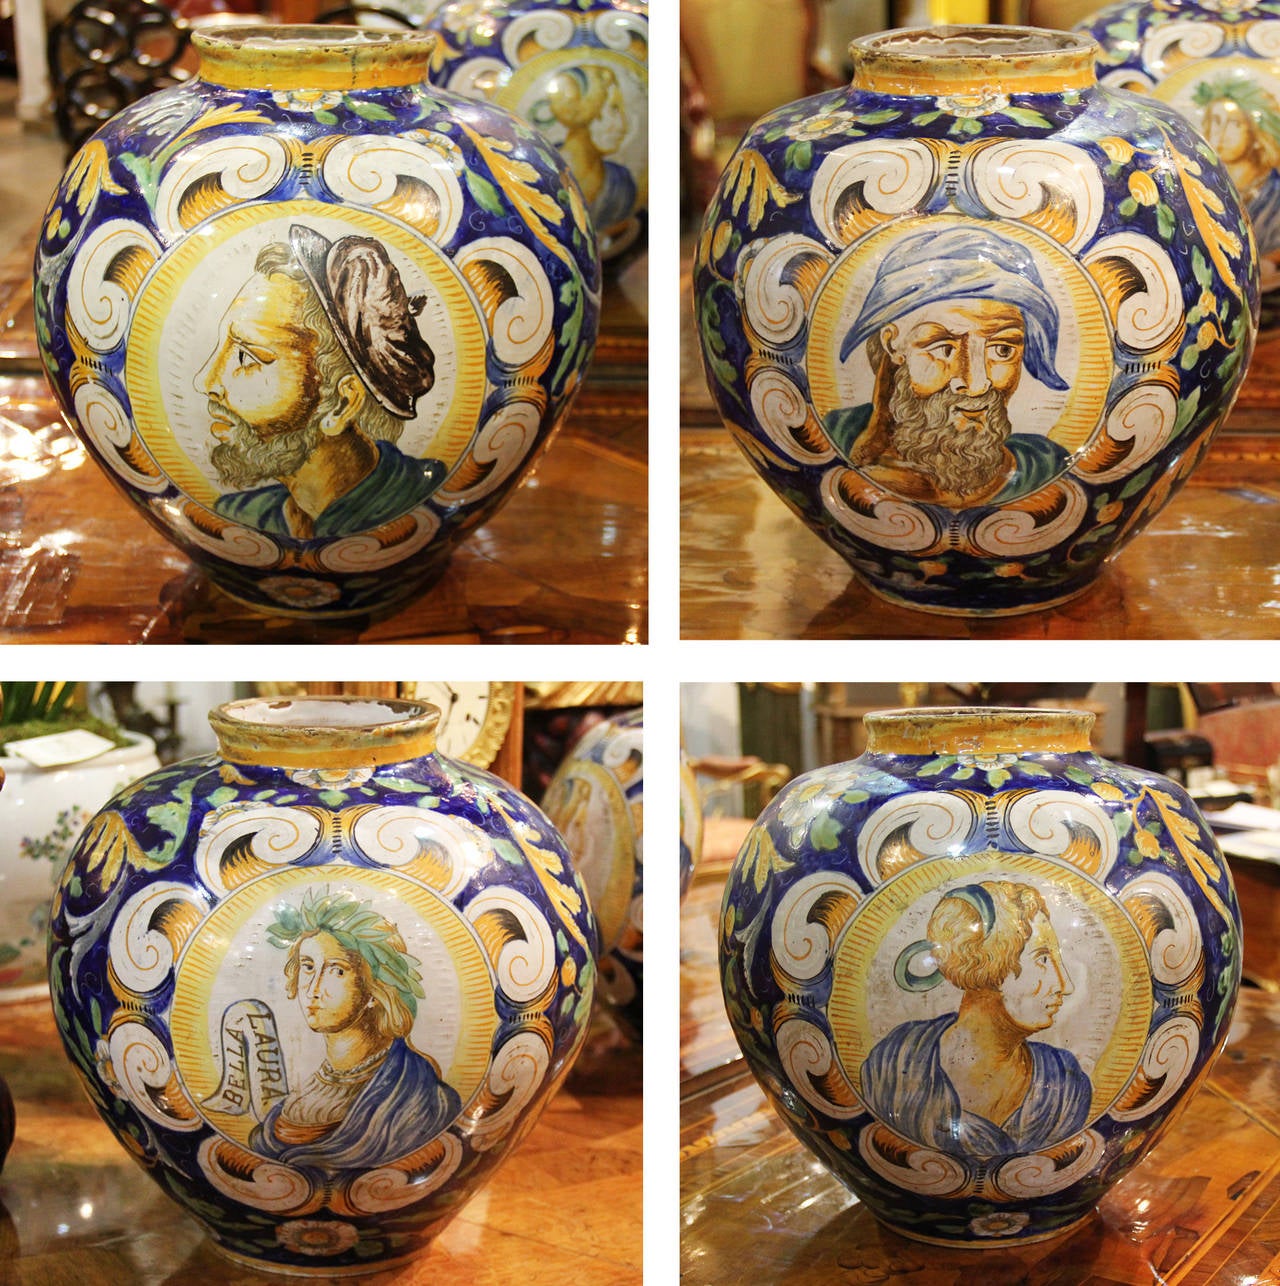 A Pair of 18th Century Italian Bulb-Shaped Majolica Cachepots richly decorated with floral and foliate motifs and featuring portraits of local merchants and their wives, covered in a white tin glaze (which you can see on the inside against the terra